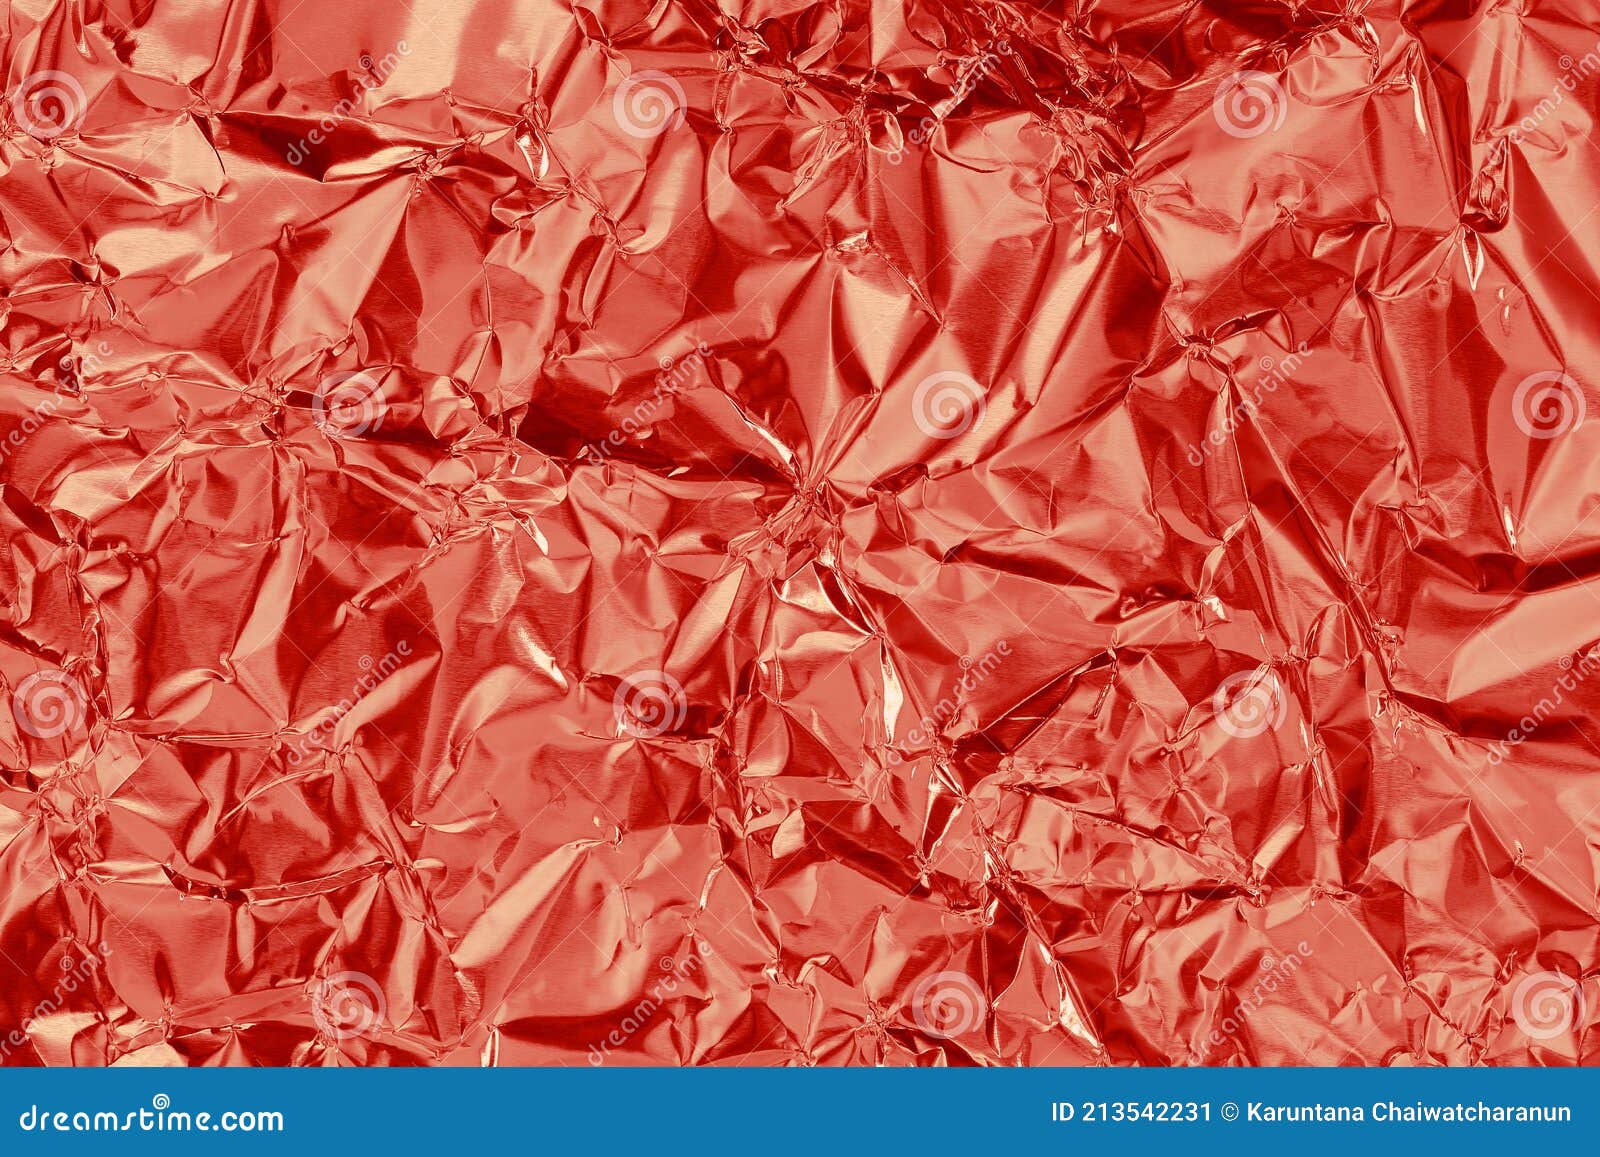 Shiny Red Foil Texture Background, Pattern of Wrapping Paper with Crumpled  and Wavy Stock Image - Image of metal, crumpled: 213542231